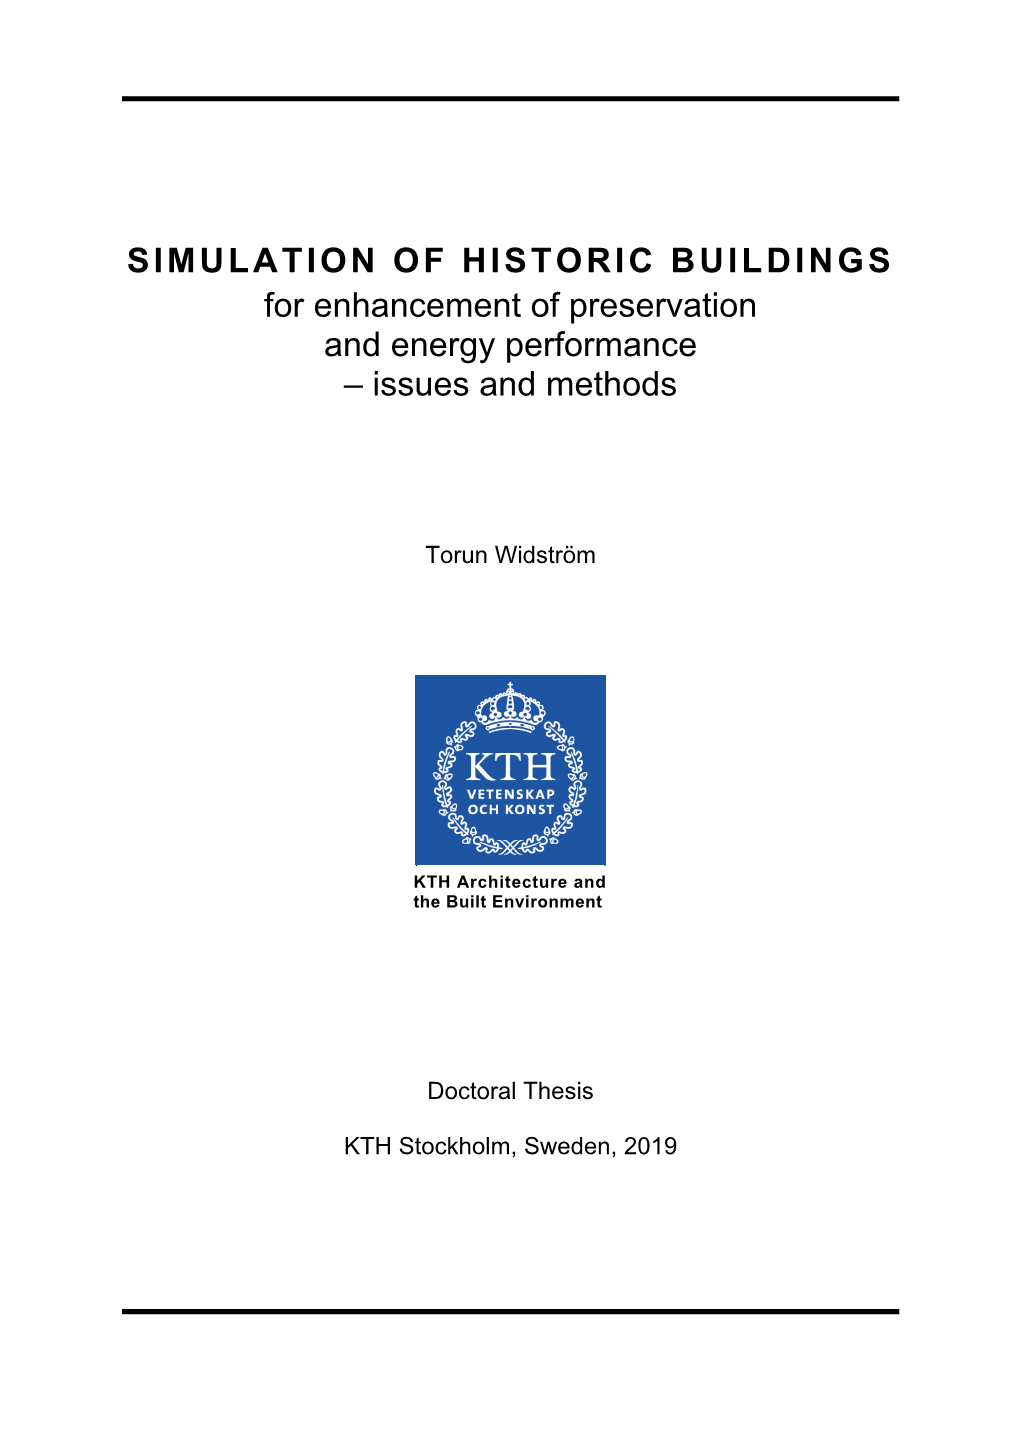 SIMULATION of HISTORIC BUILDINGS for Enhancement of Preservation and Energy Performance – Issues and Methods